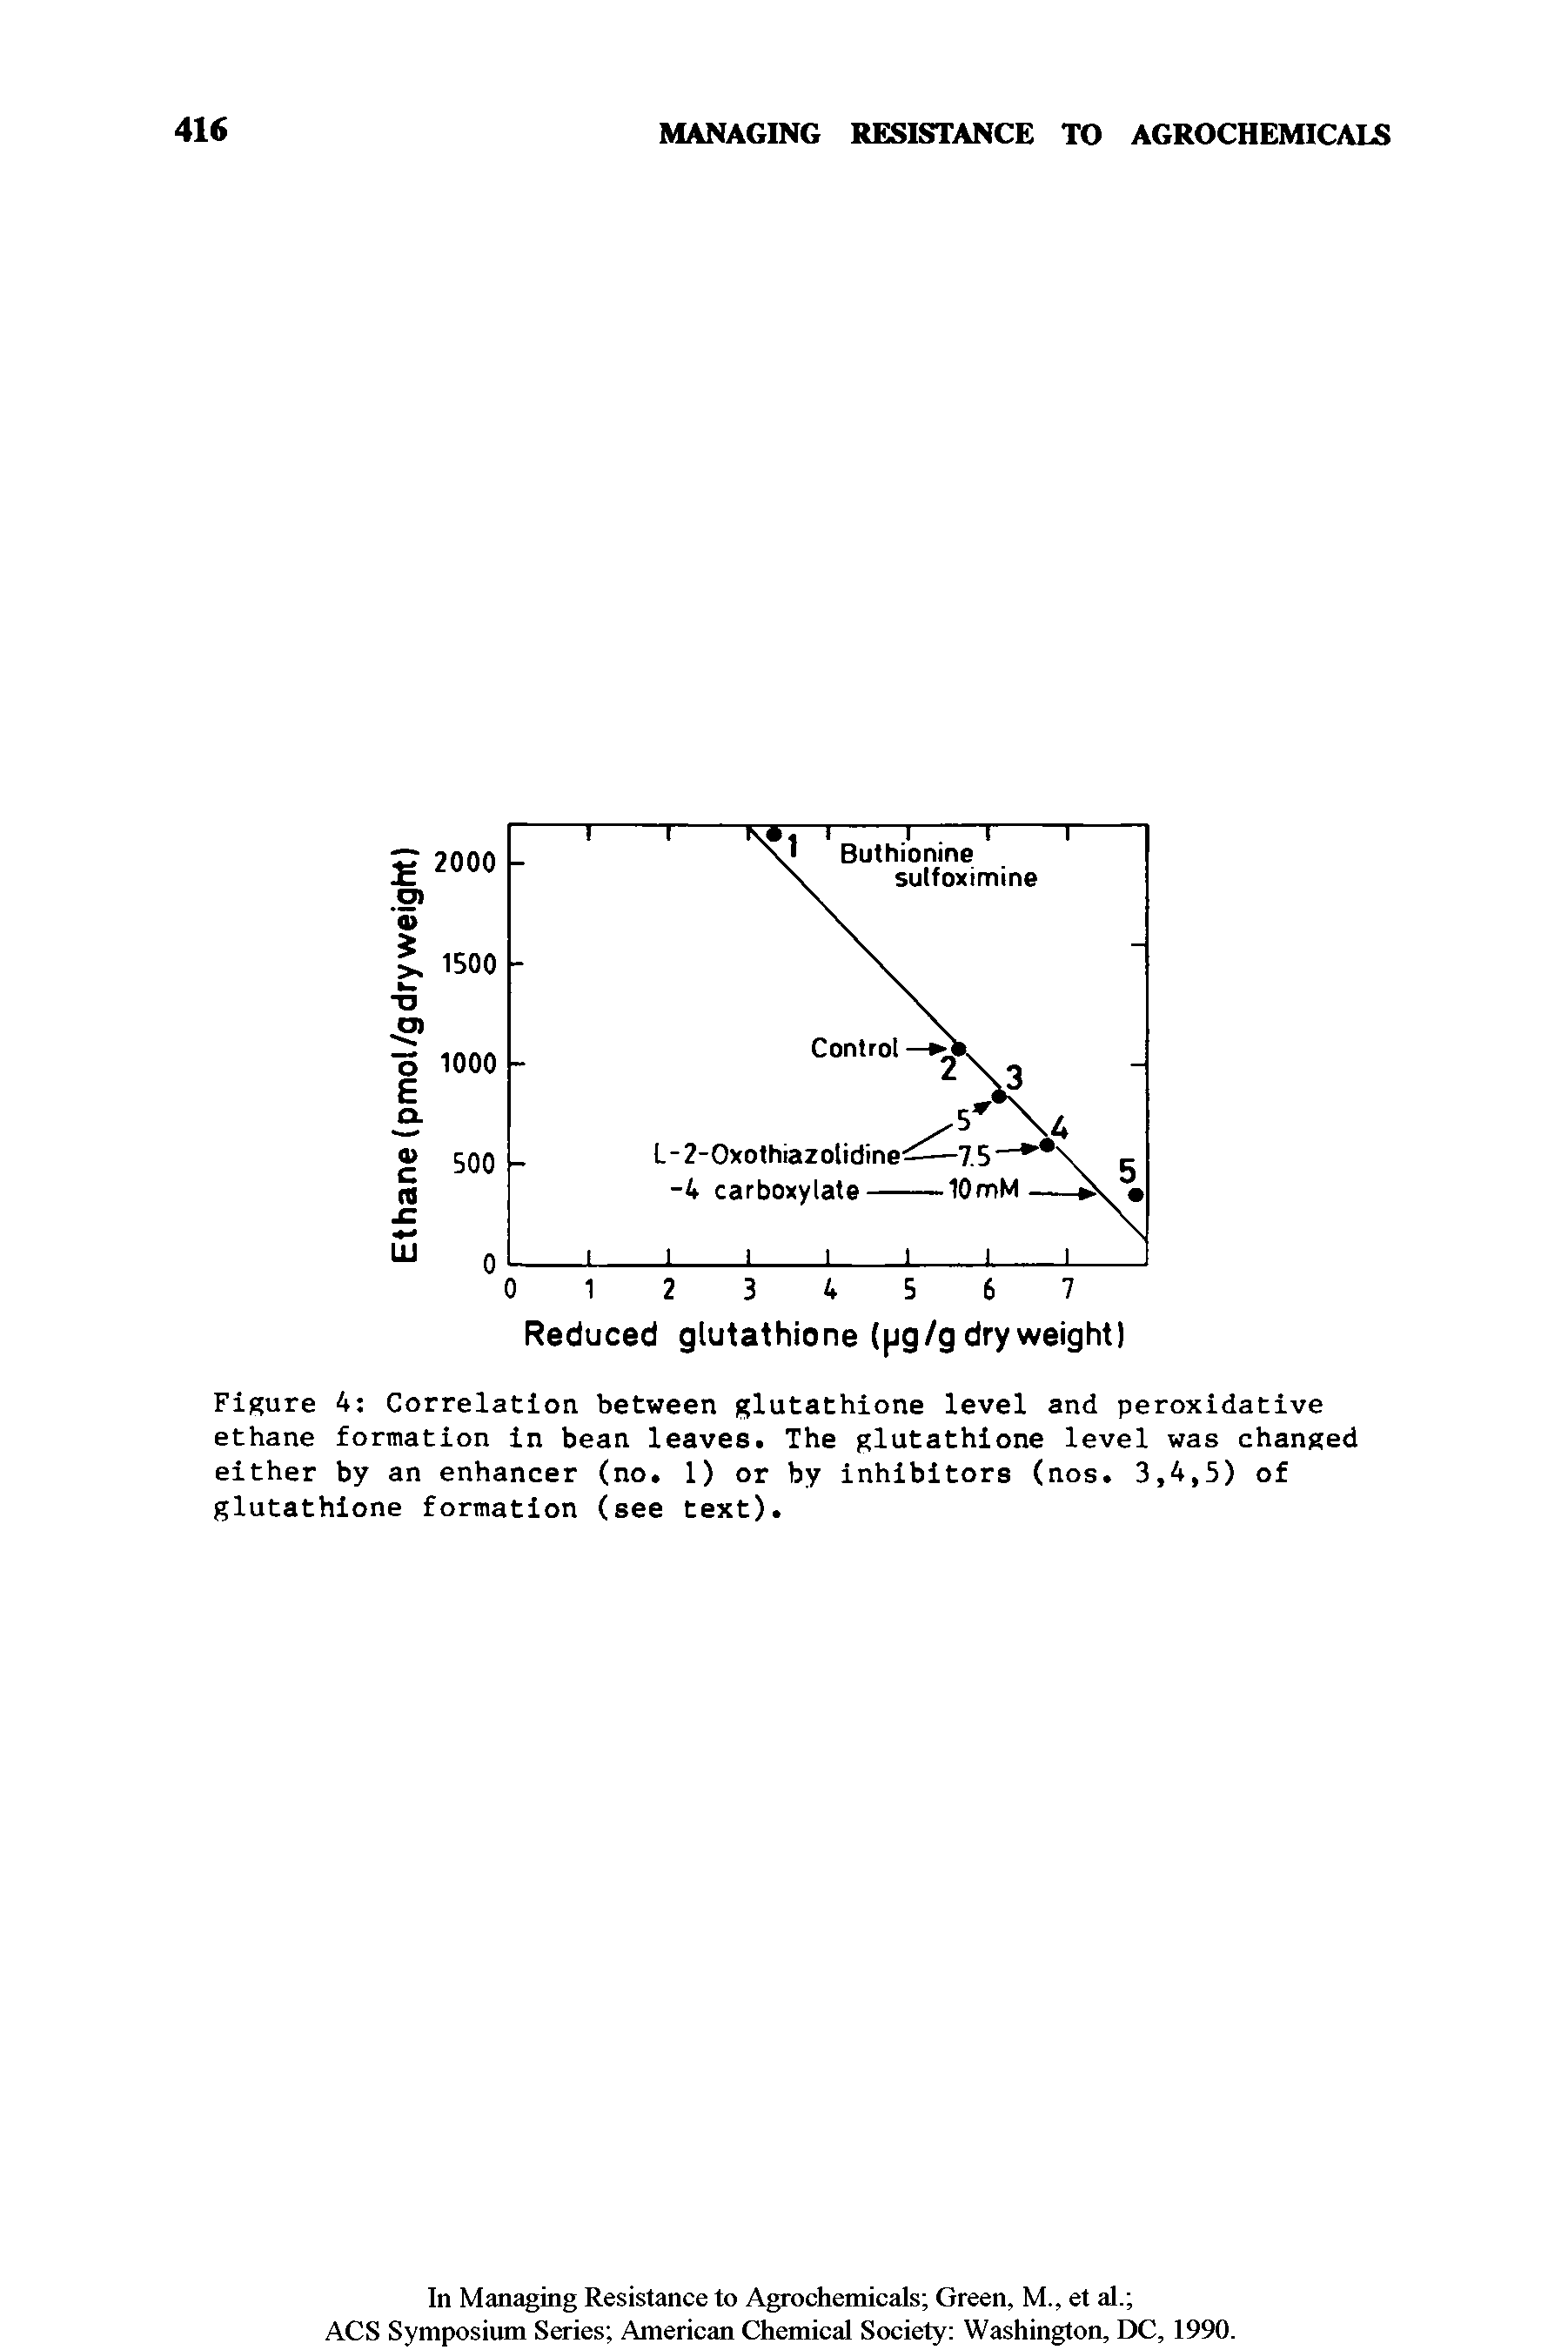 Figure 4 Correlation between glutathione level and peroxidative ethane formation in bean leaves. The glutathione level was changed either by an enhancer (no. 1) or by inhibitors (nos. 3,4,5) of glutathione formation (see text).